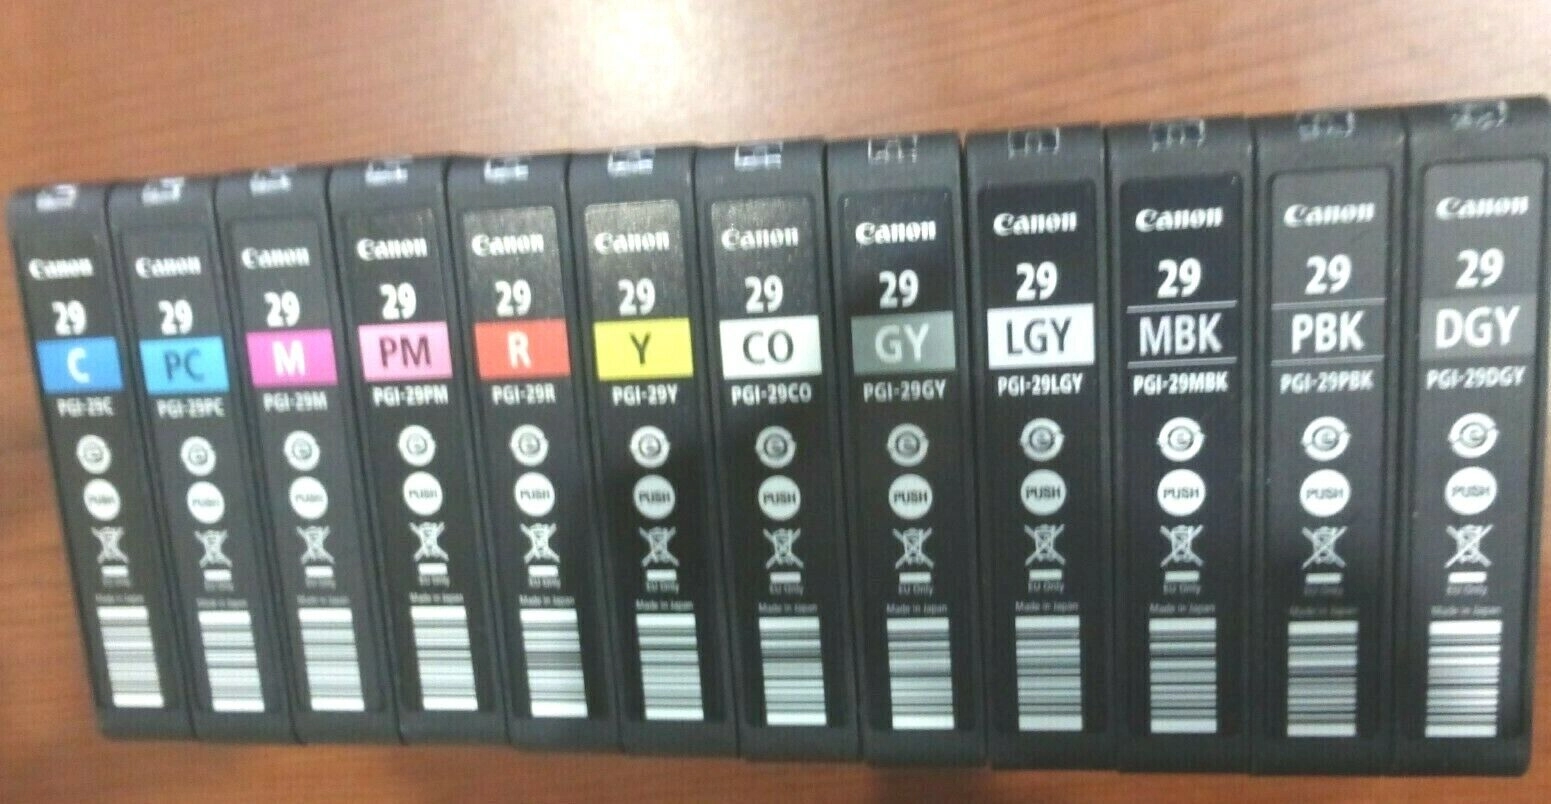 NEW CANON 29 INK CARTRIDGE FULL SET OF 12 COLORS N